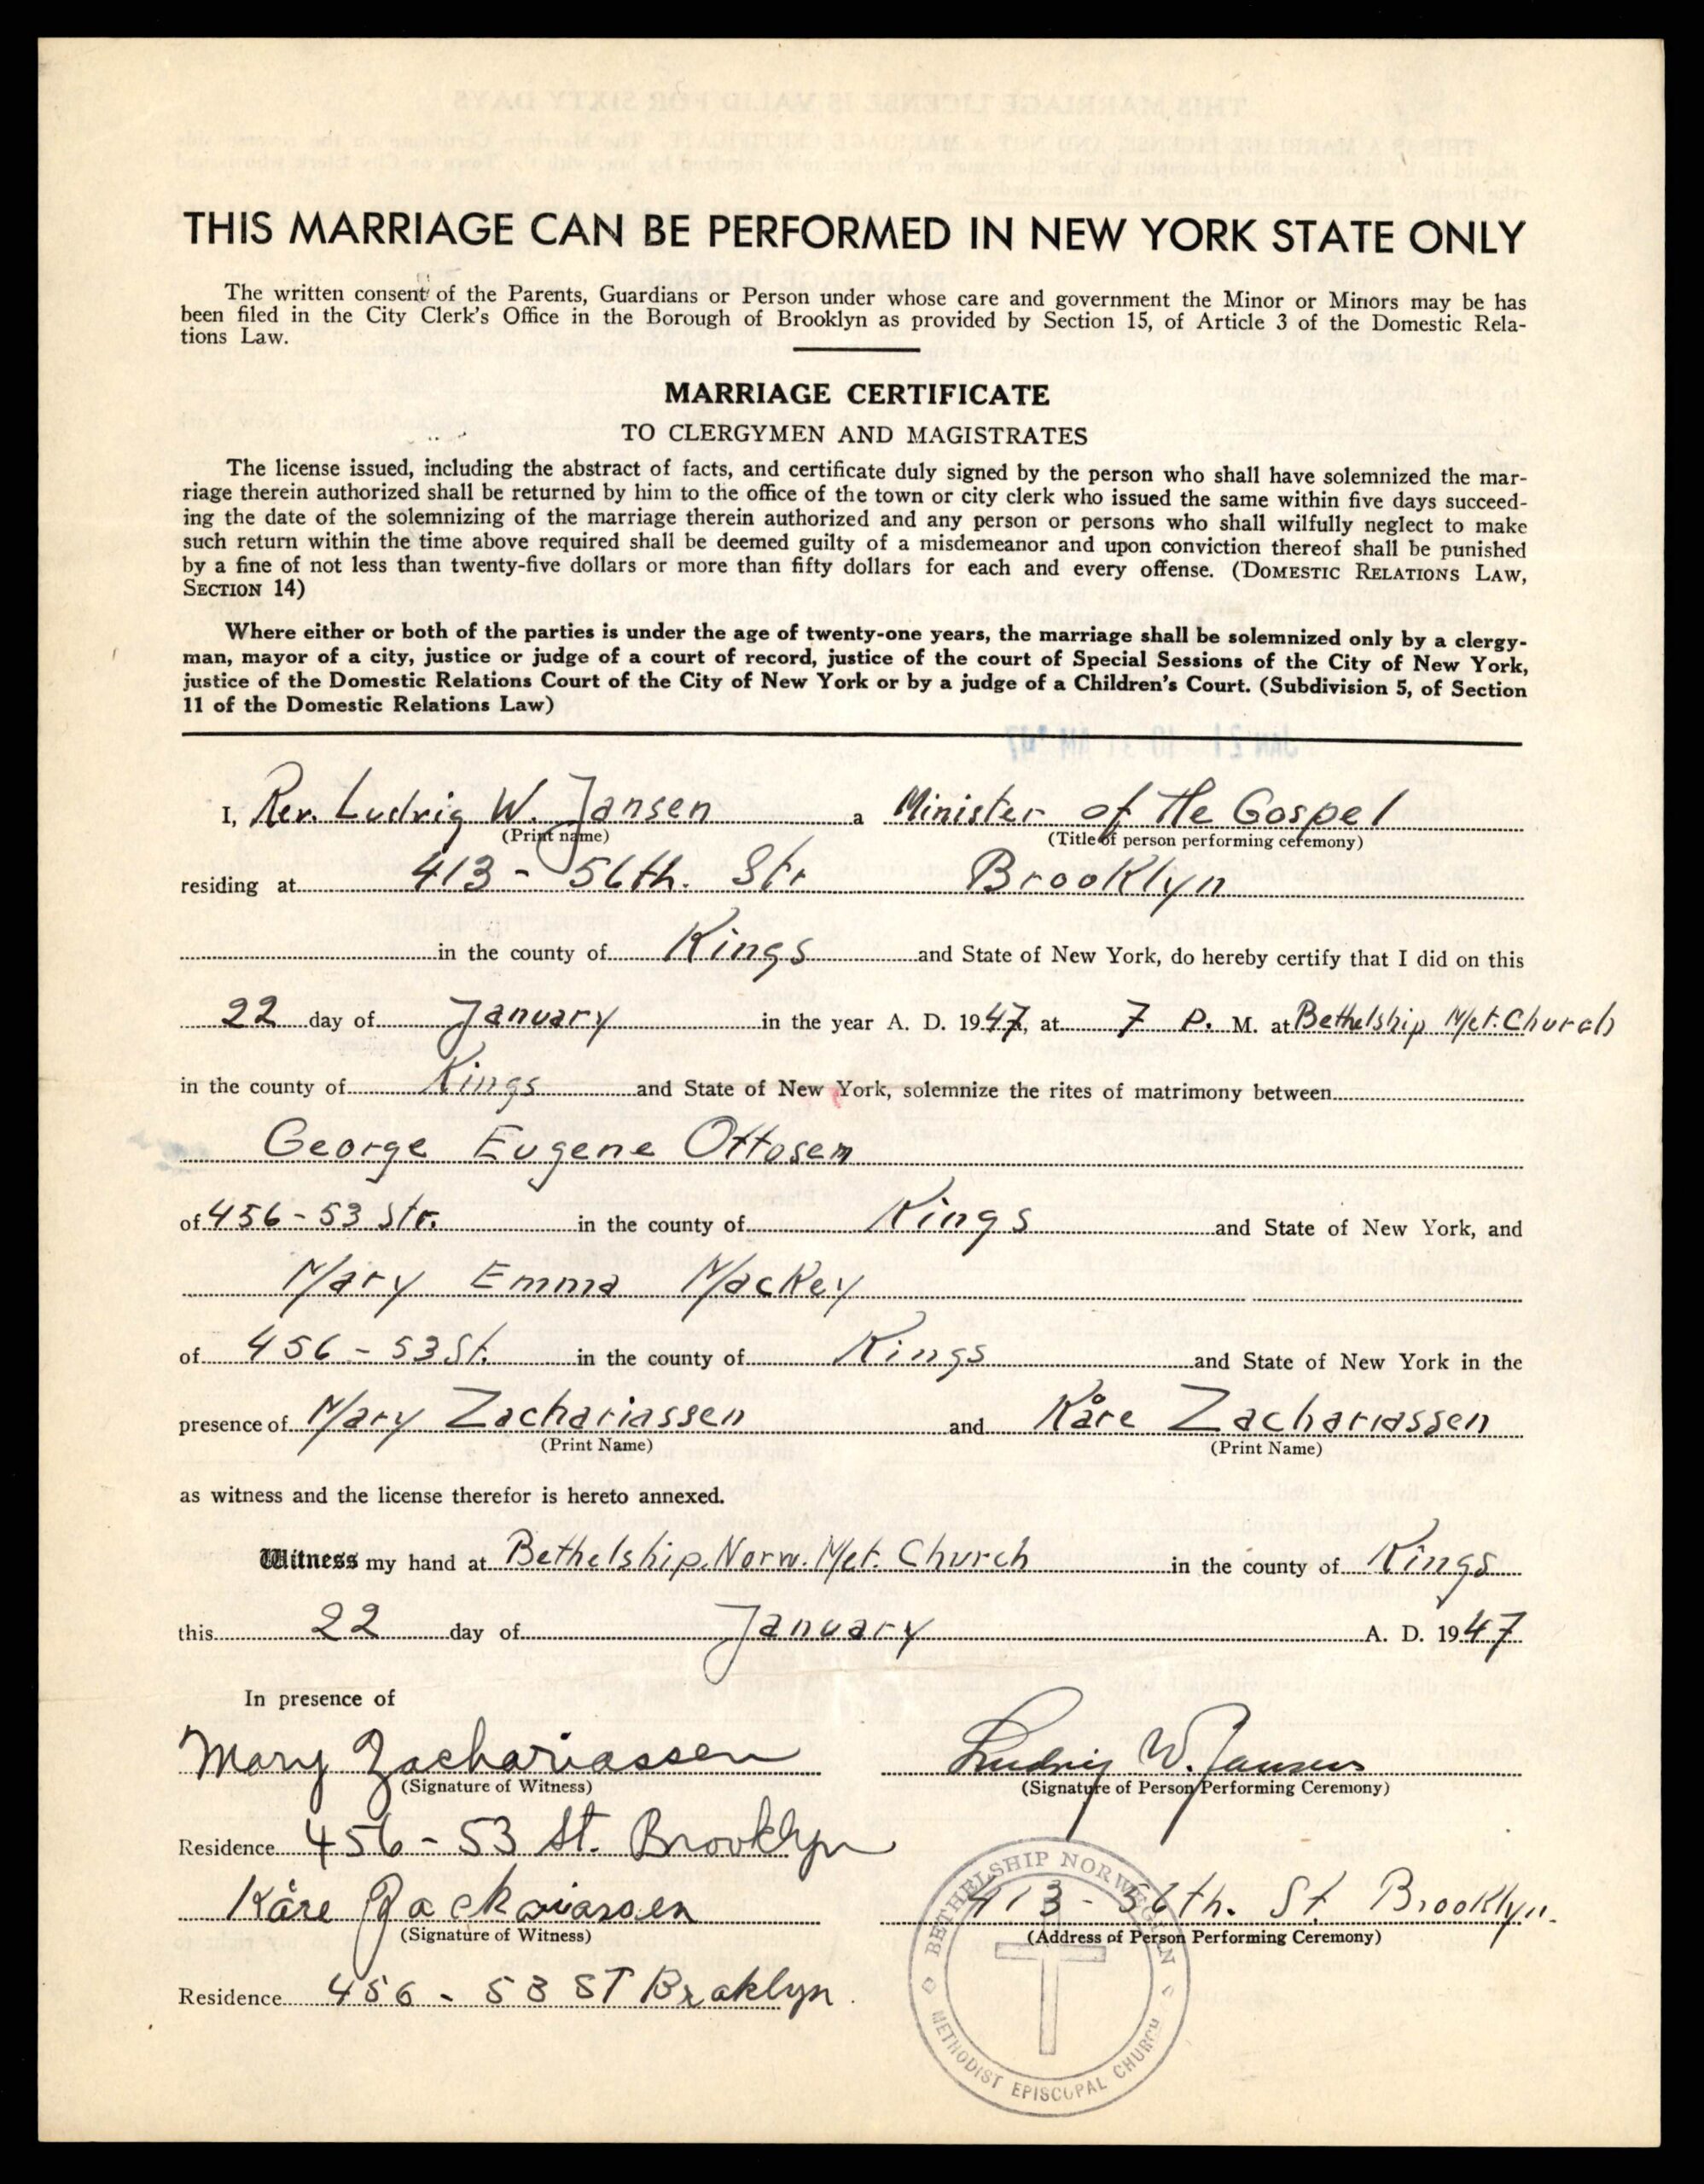 Page 4 of the marriage record: the marriage certificate issued when the wedding took place